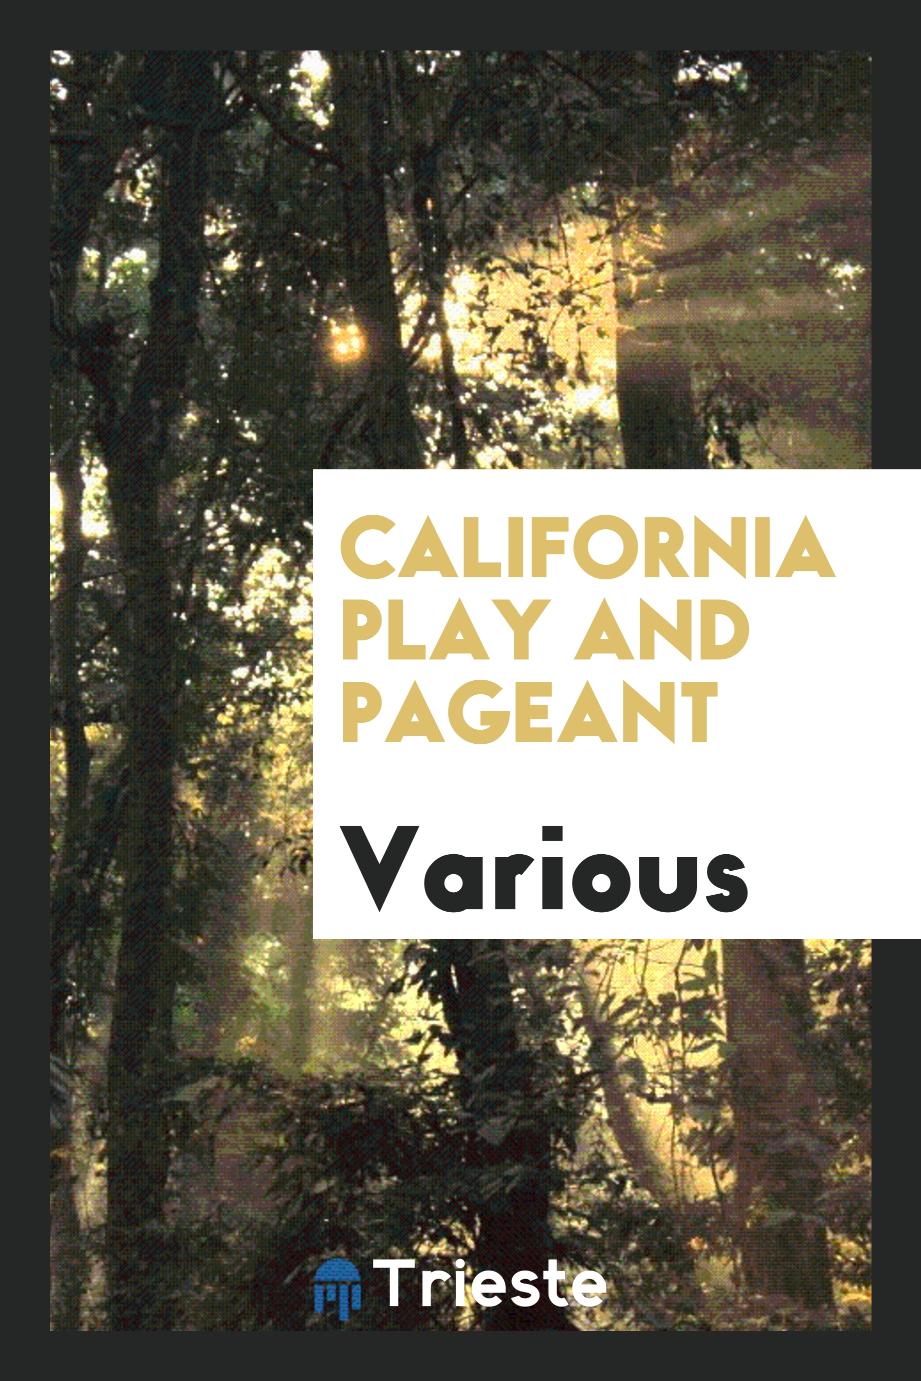 California Play and Pageant